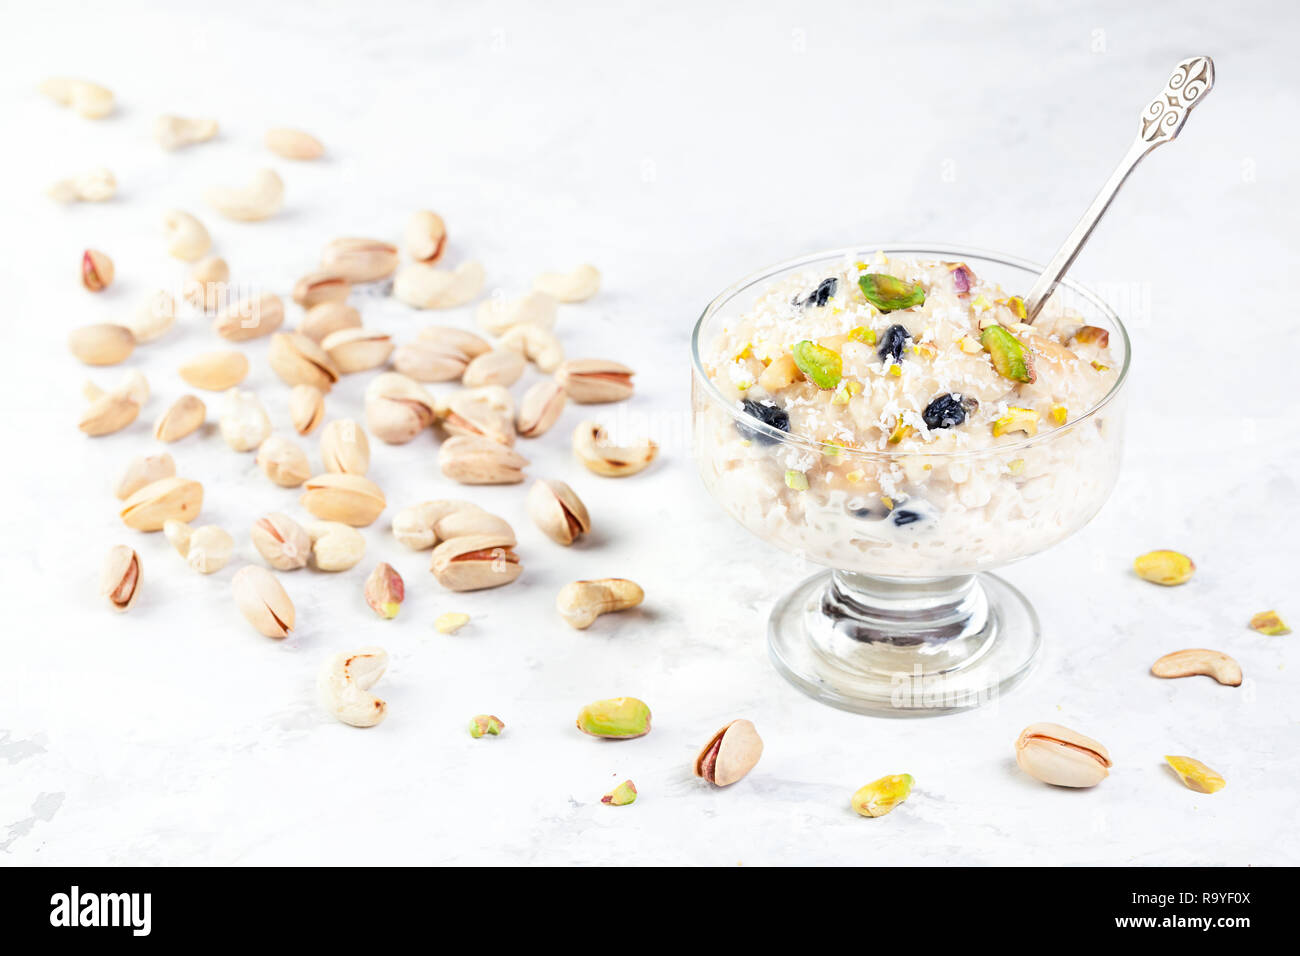 Indian Kheer sweet dessert from rice, nuts and spices in ice cream bowl on white marble table Stock Photo